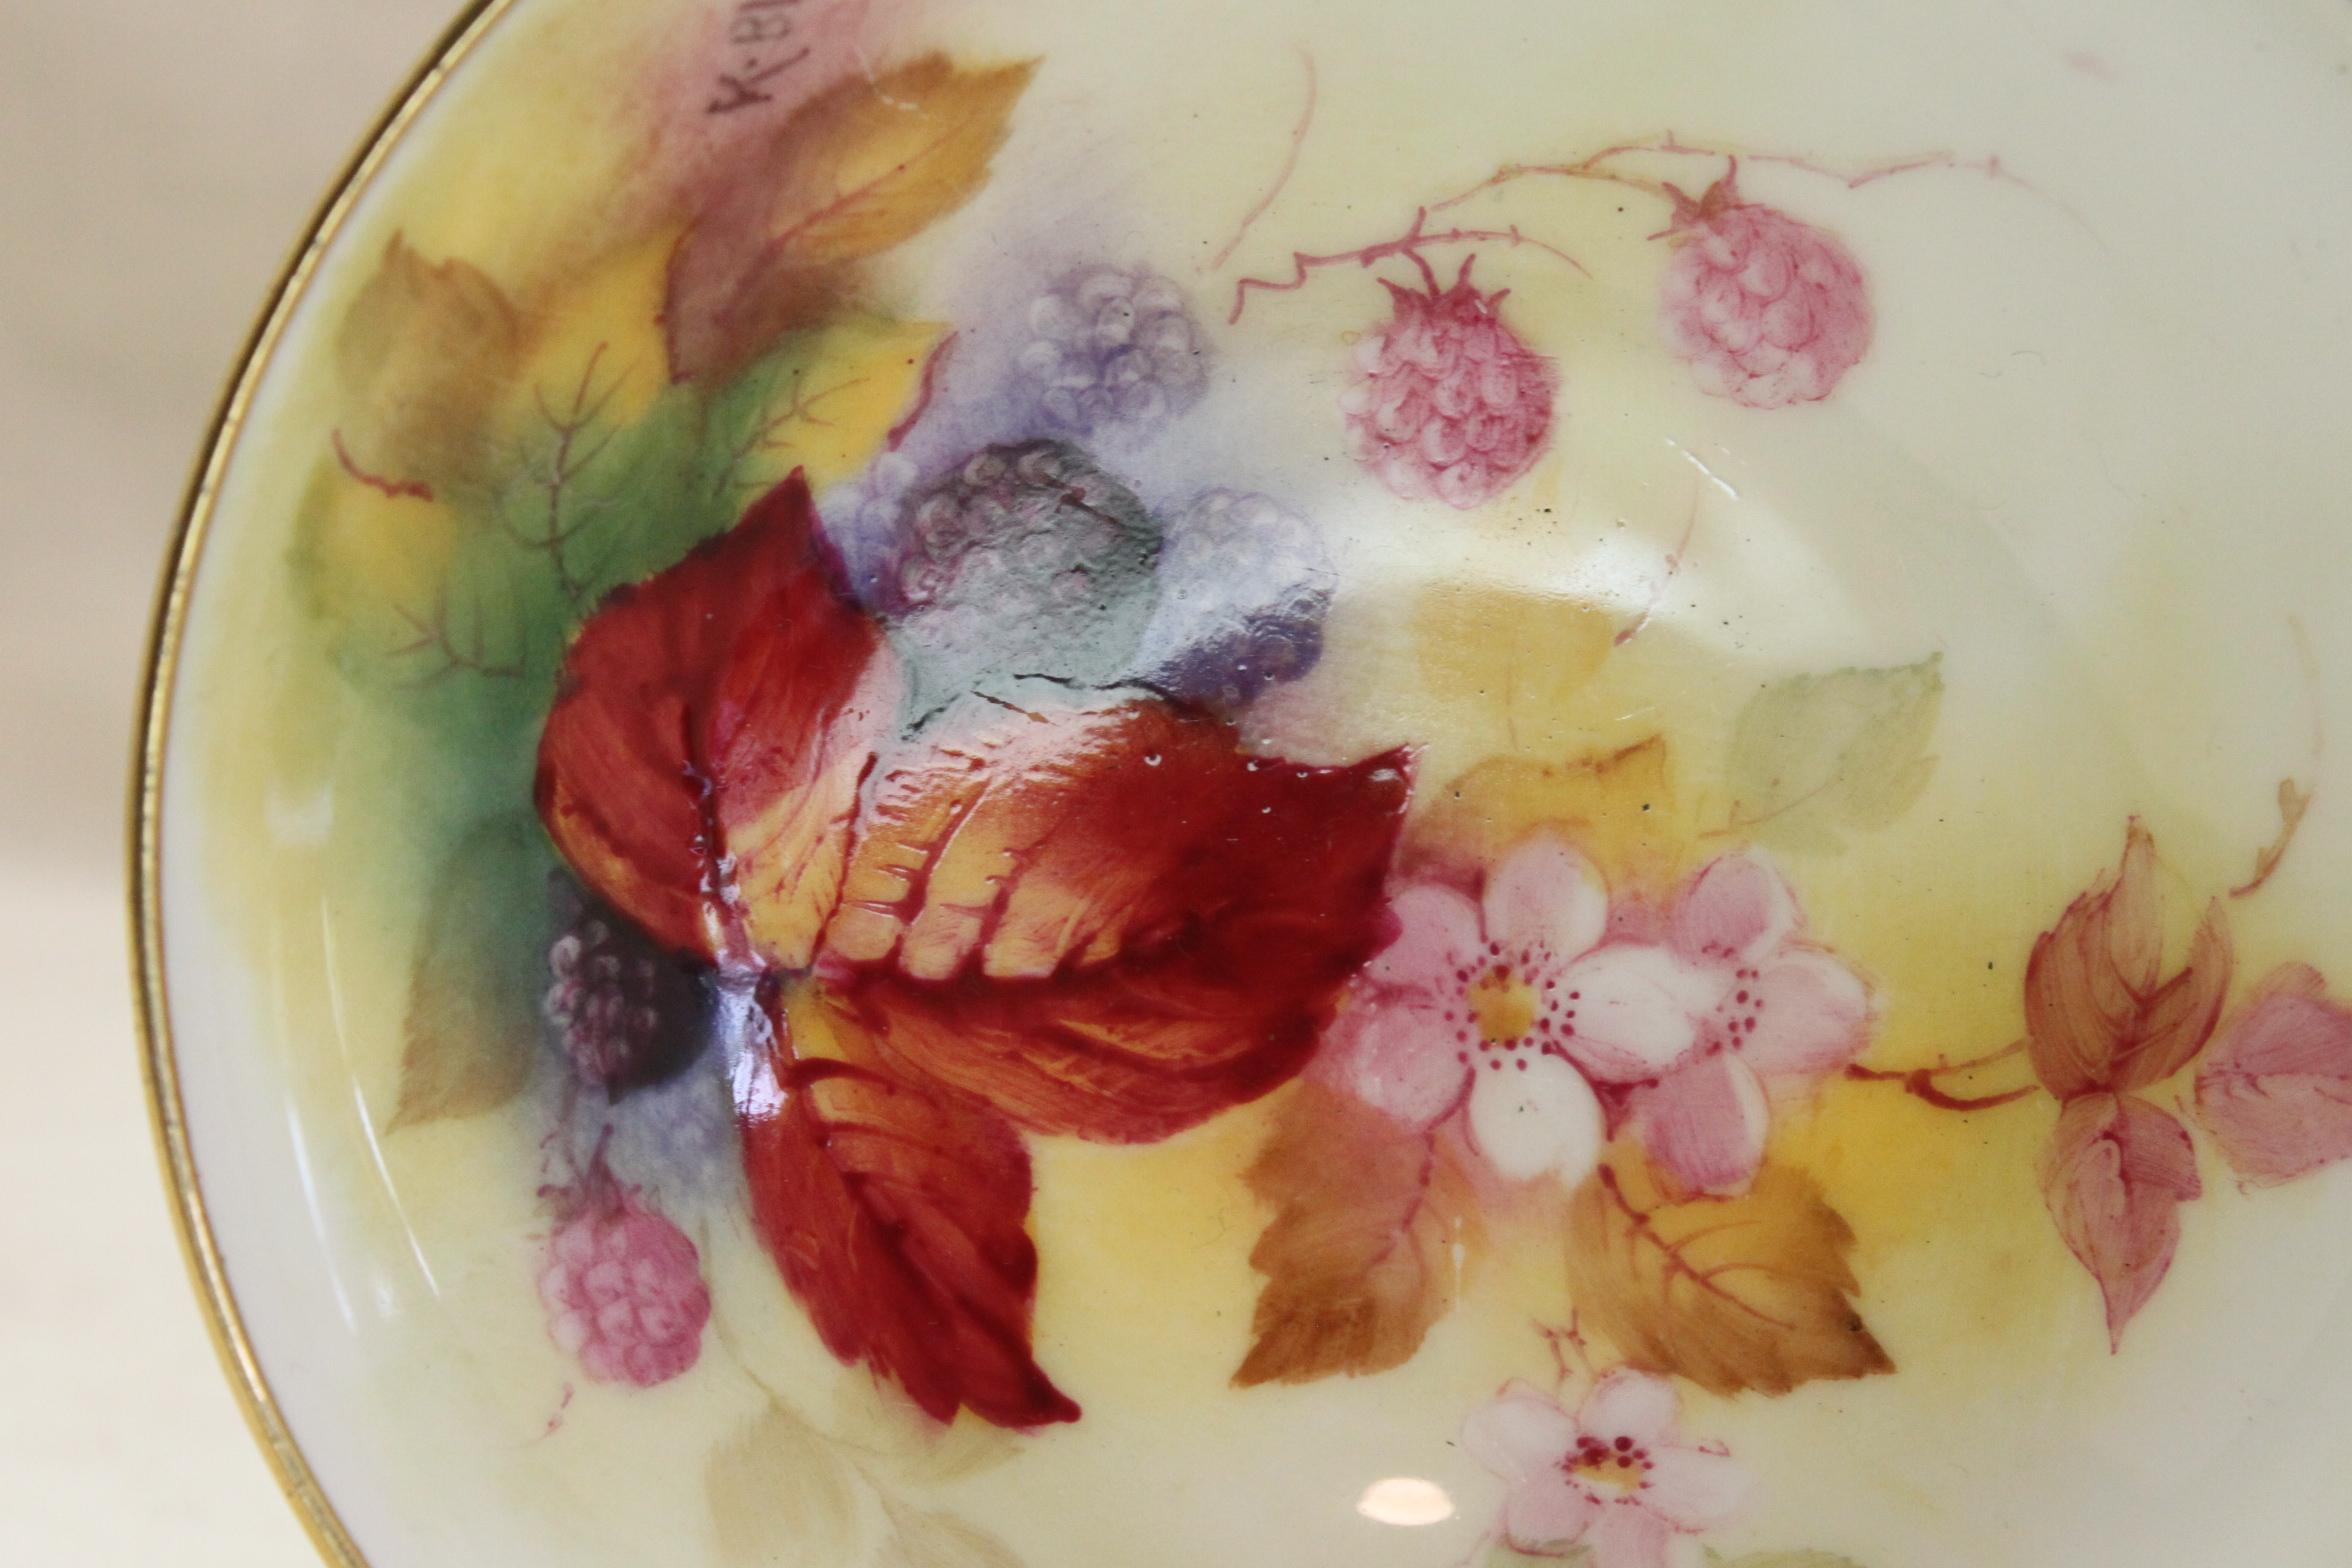 This small footed dish is decorated with Kitty Blake's trademark hand painted blackberries, flowers and foliage, done in autumnal tones, and enhanced with gilding to the rim and foot. Kitty Blake worked at the Royal Worcester factory for 48 years,